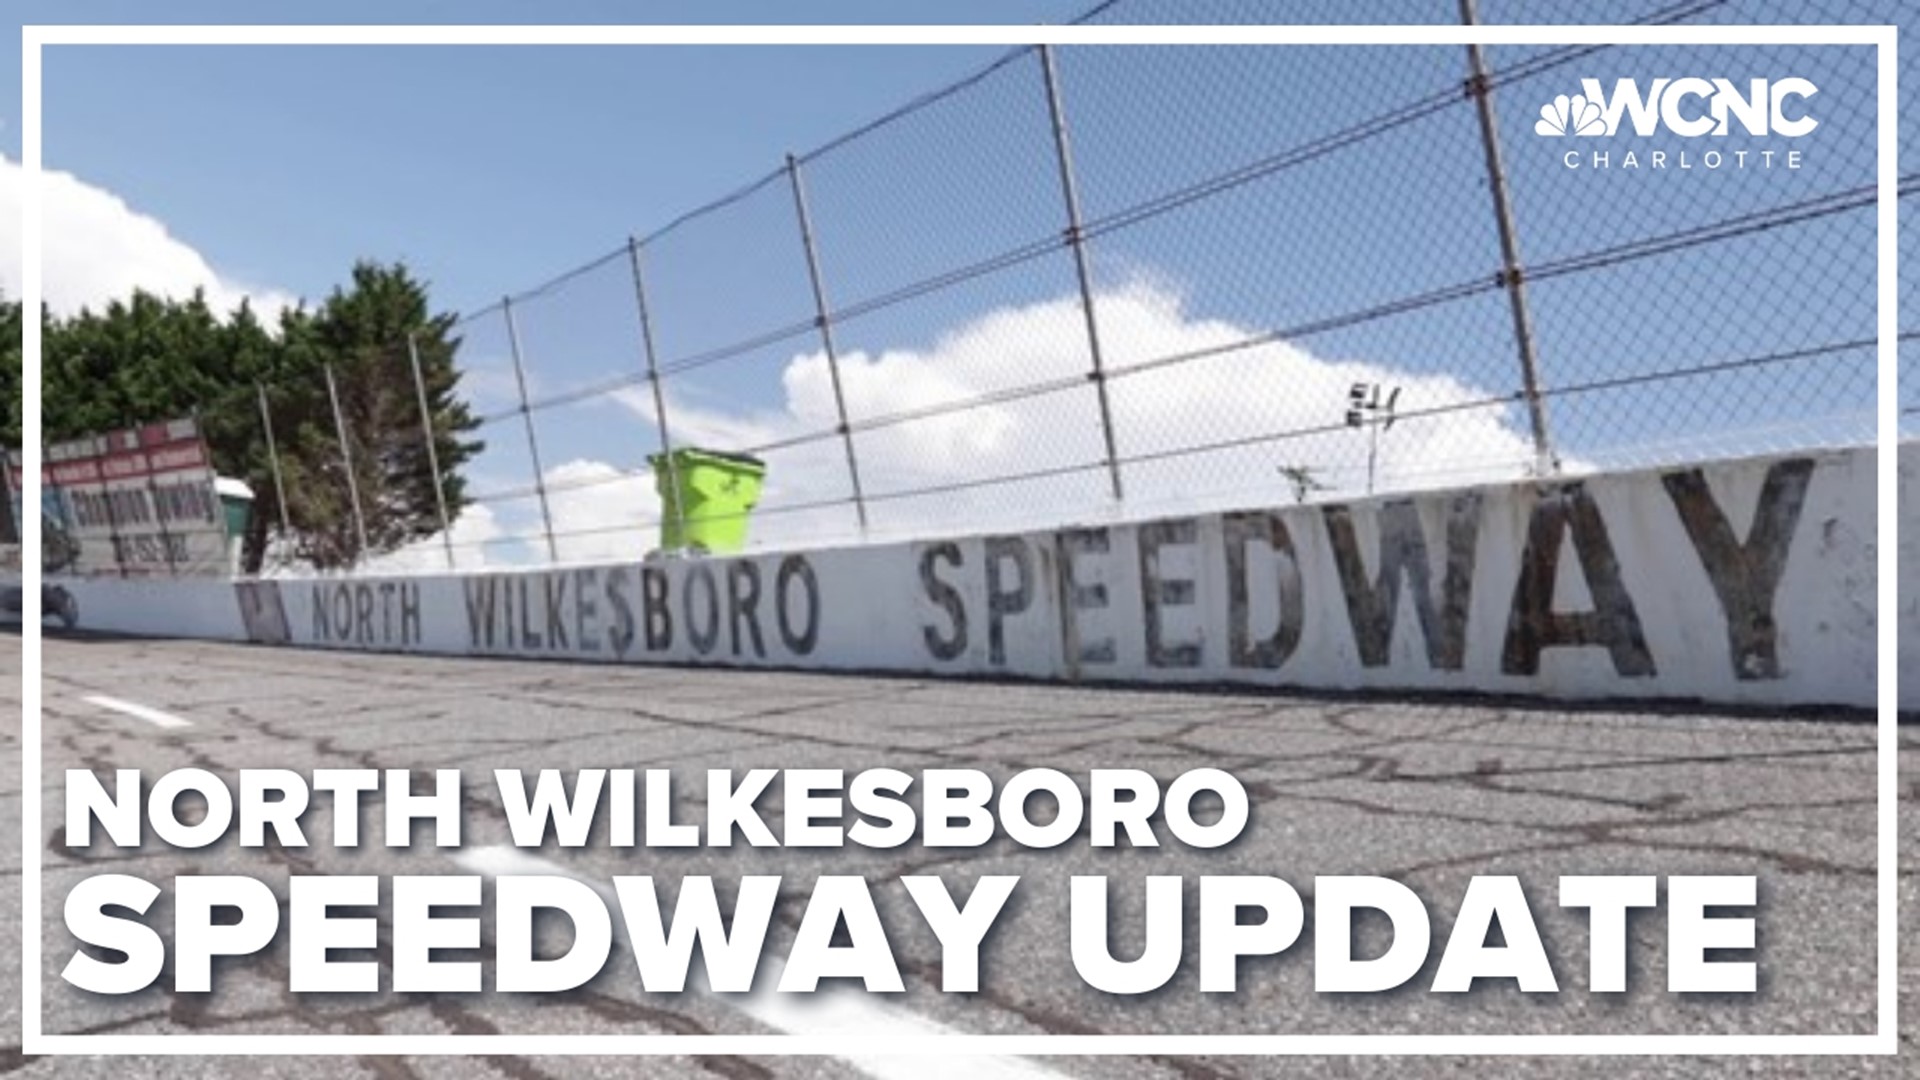 The progress at North Wilkesboro Speedway is incredible.